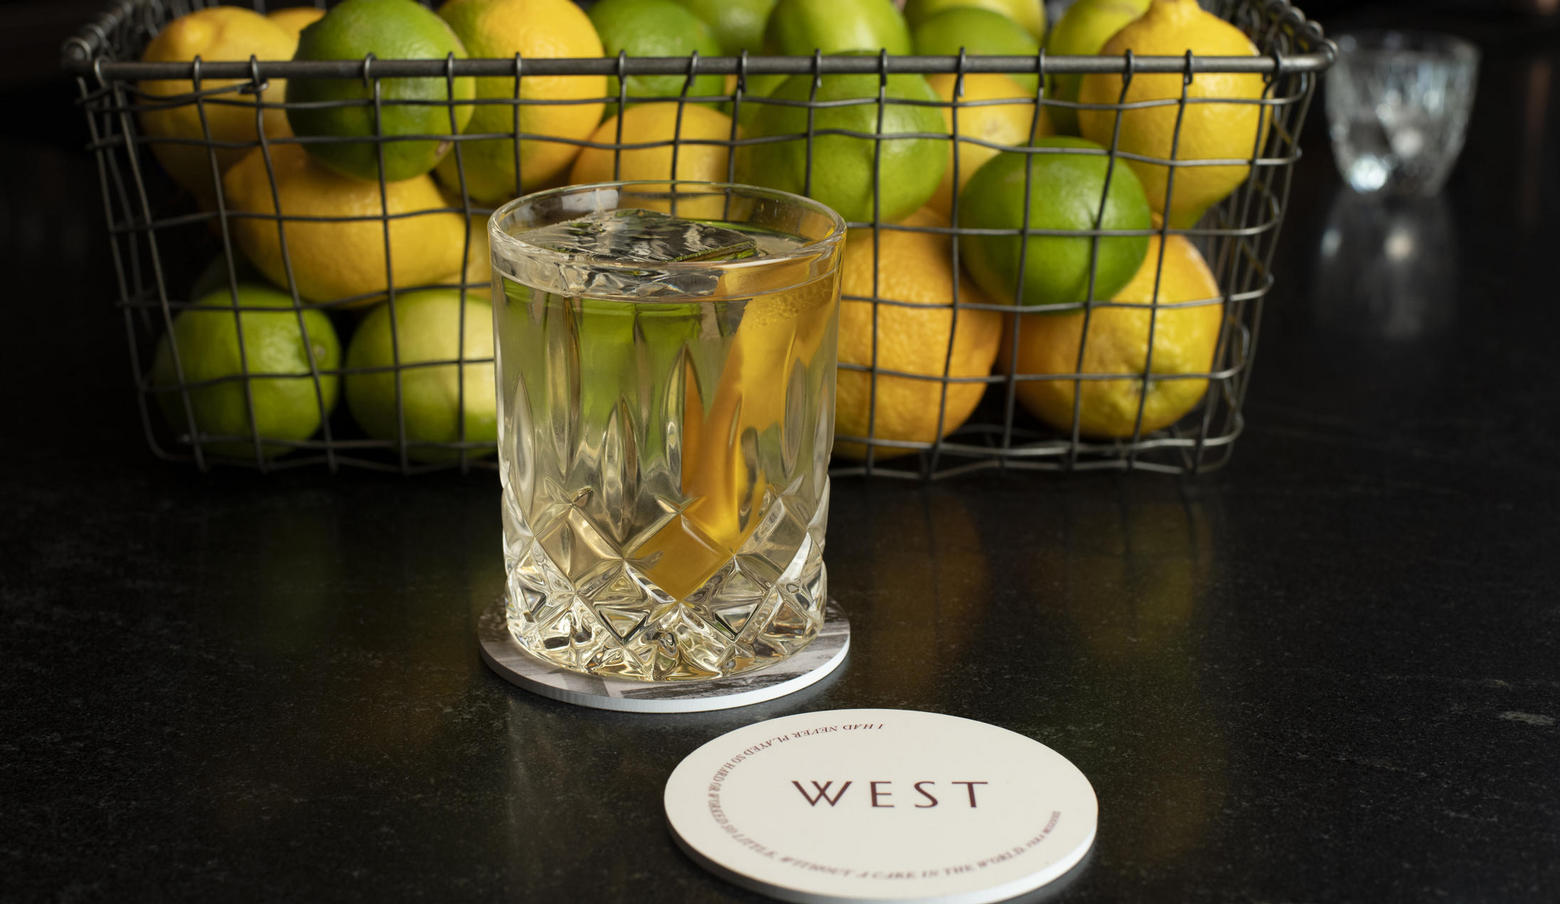 West cocktail